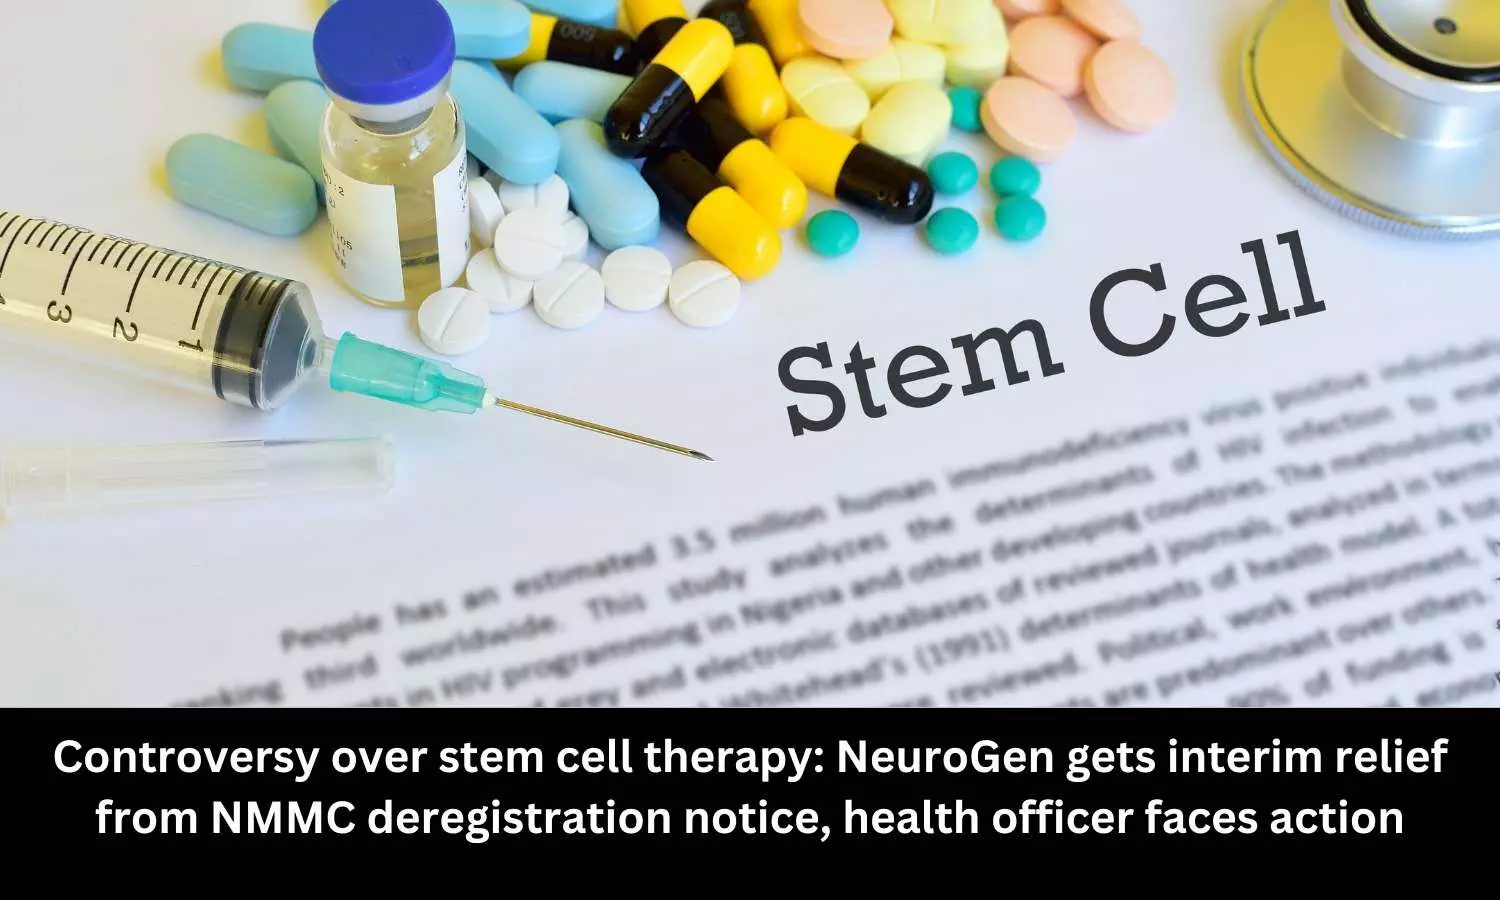 Controversy over stem cell therapy: NeuroGen gets interim relief from NMMC deregistration notice, health officer faces action